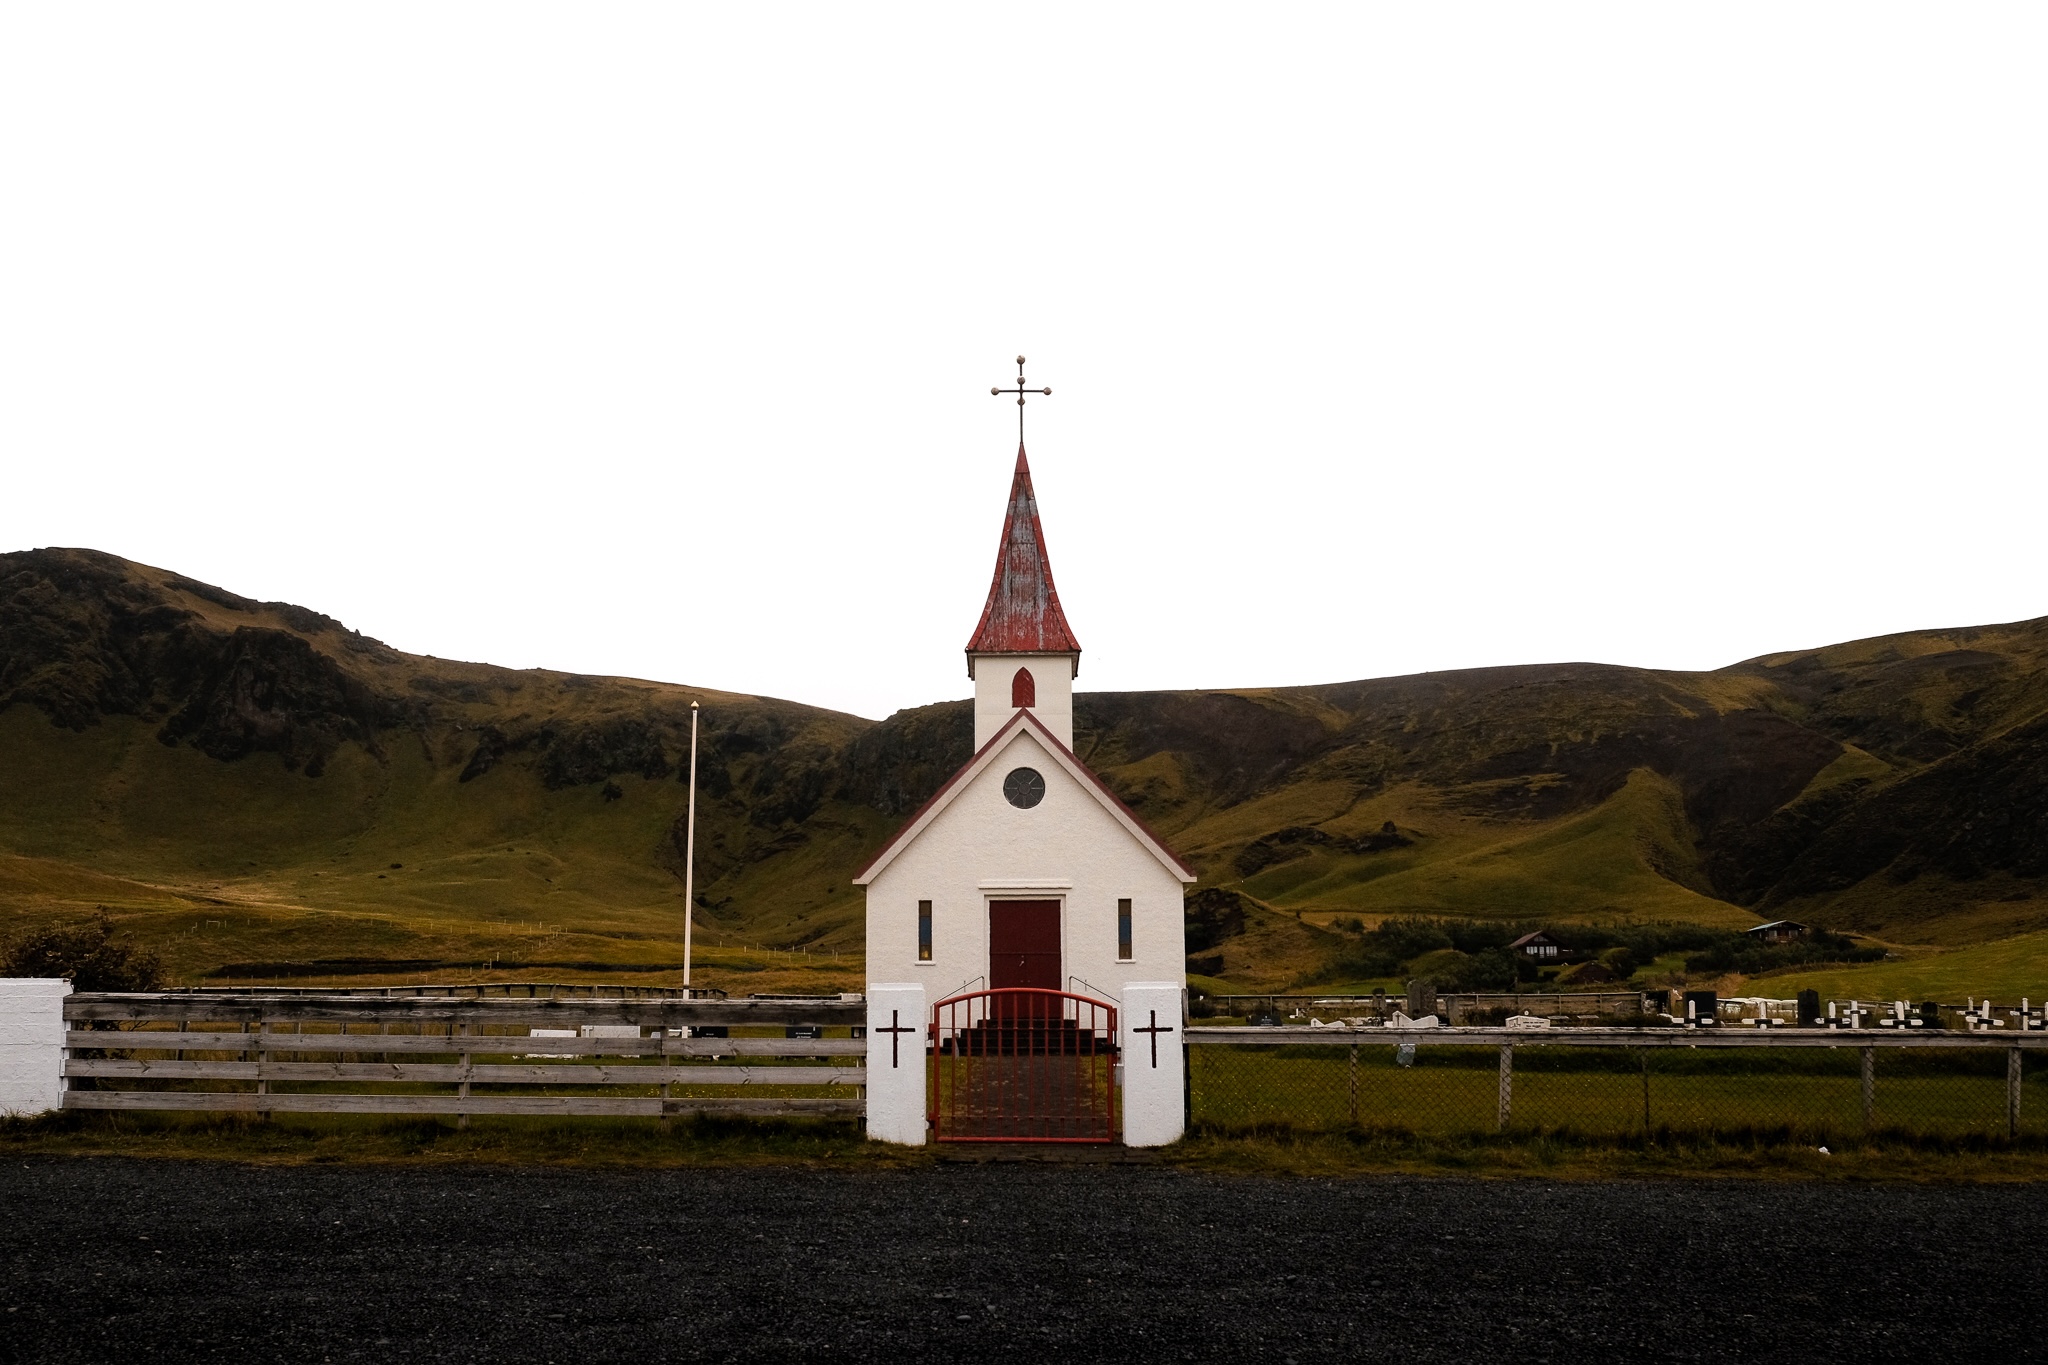 A white church with red trim and a graveyard, against a grassy mountain side